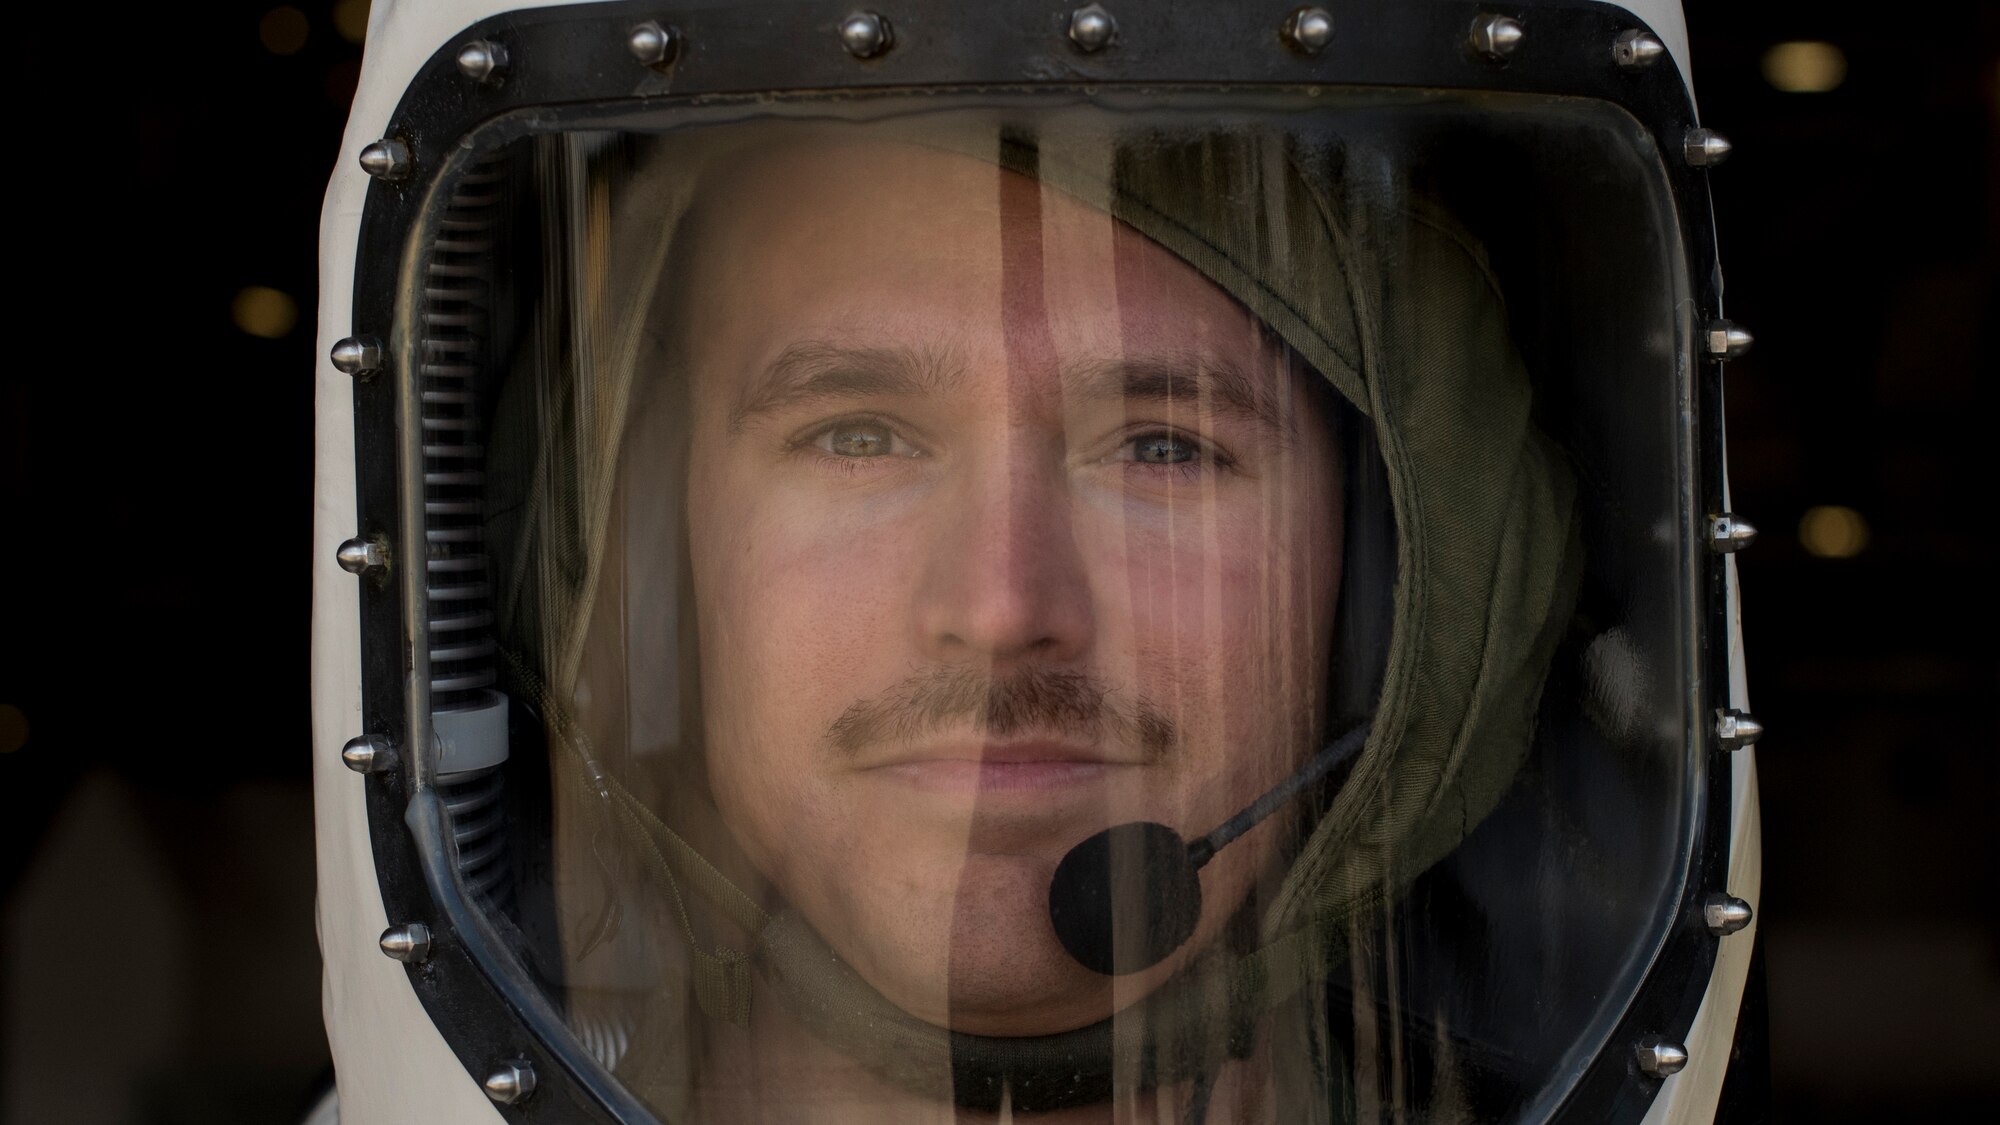 Technician stands in a Self-Contained Atmospheric Protective Ensemble suit